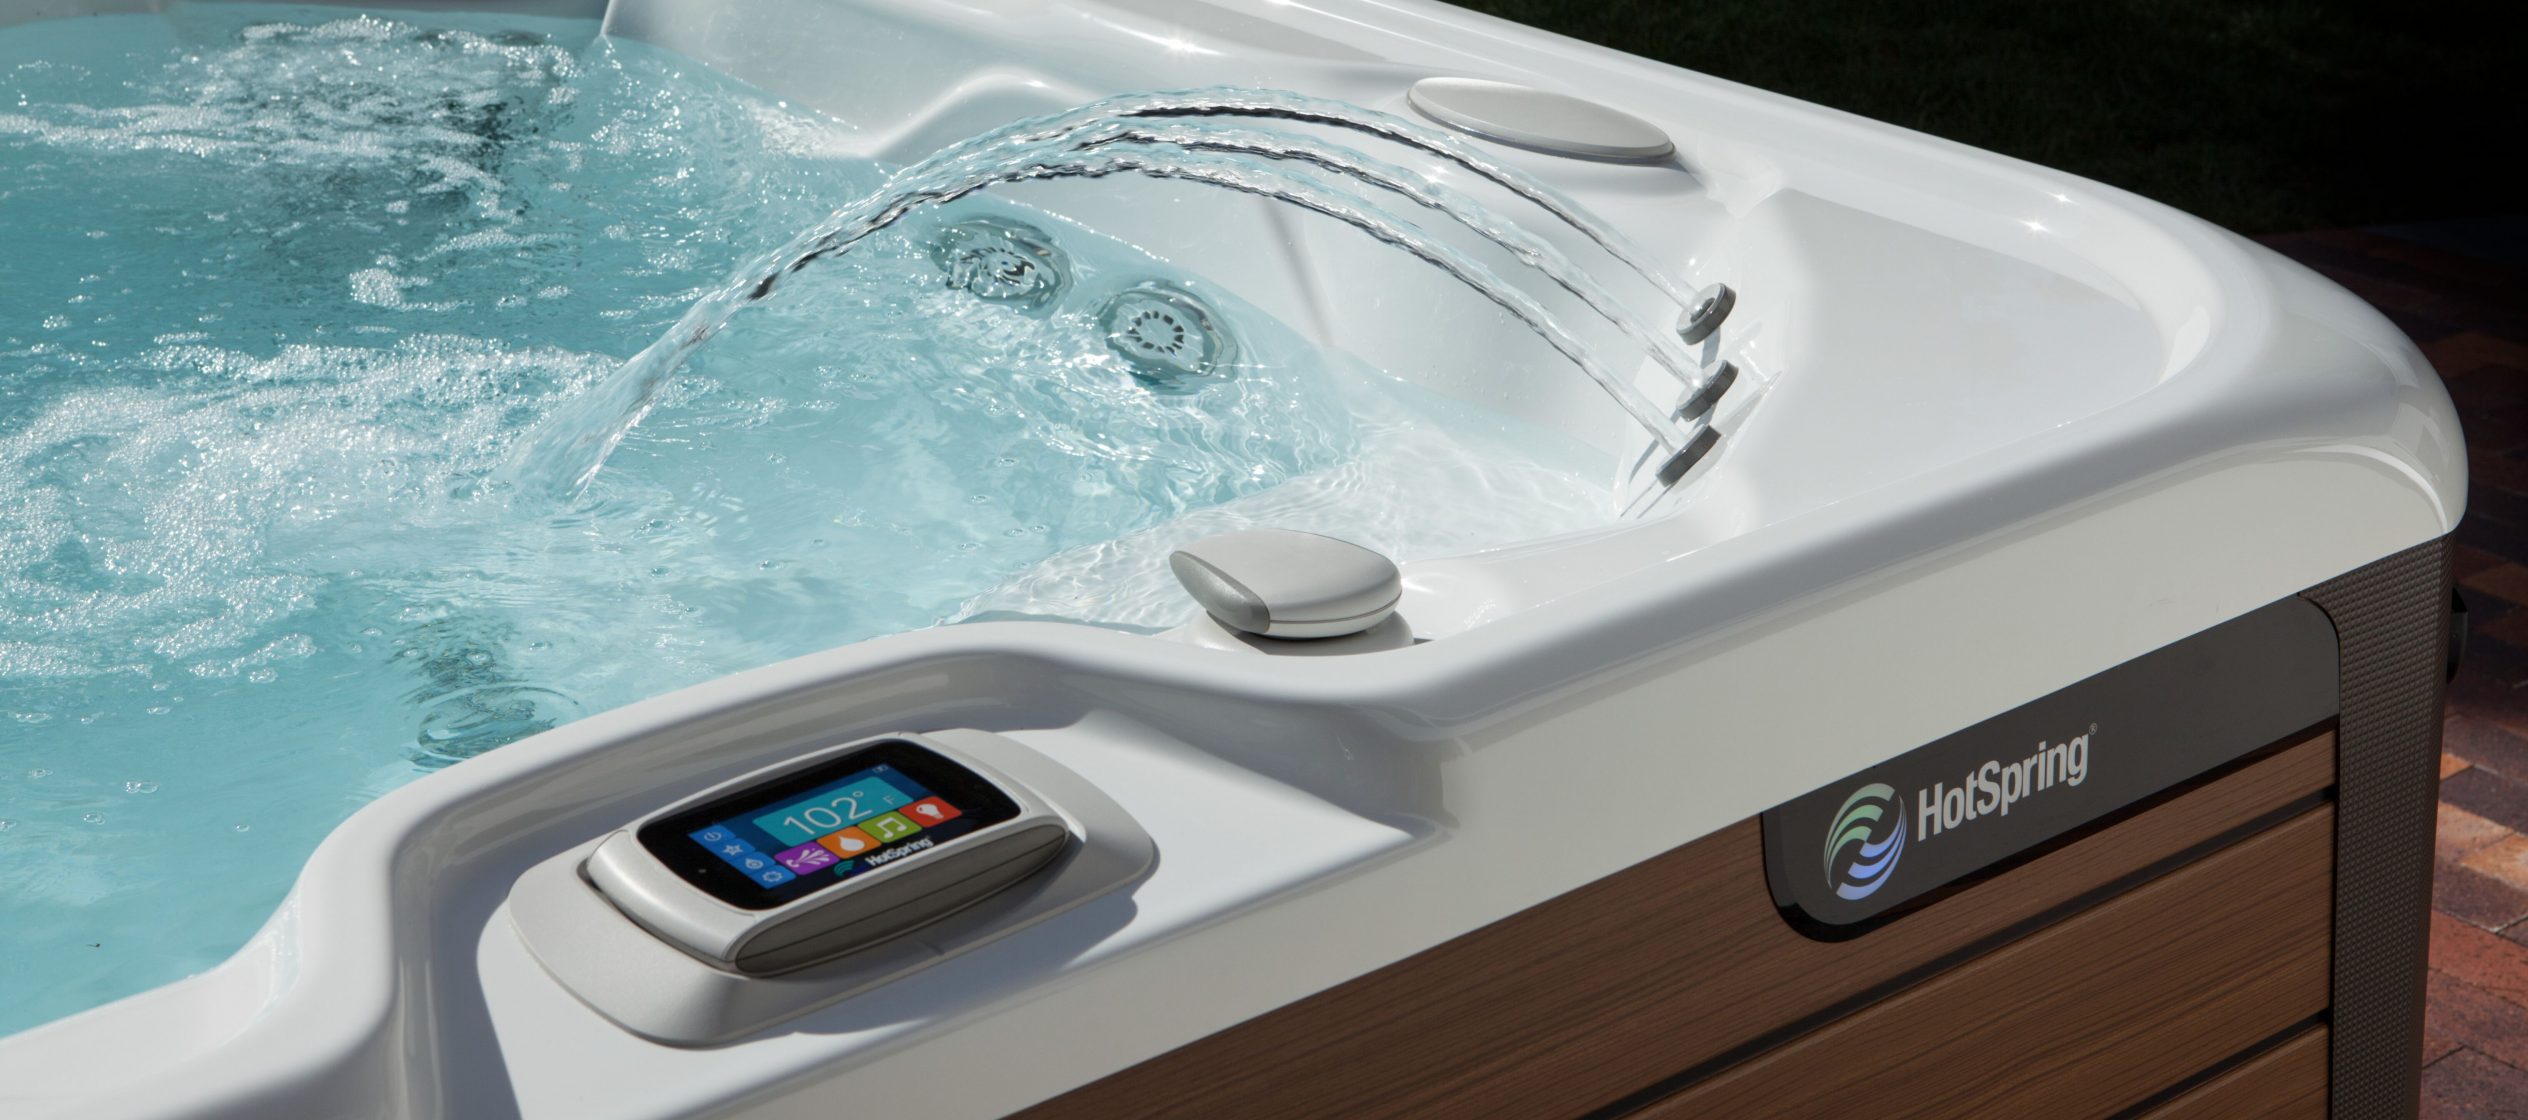 How to install an indoor hot tub? Easy to install indoor spa